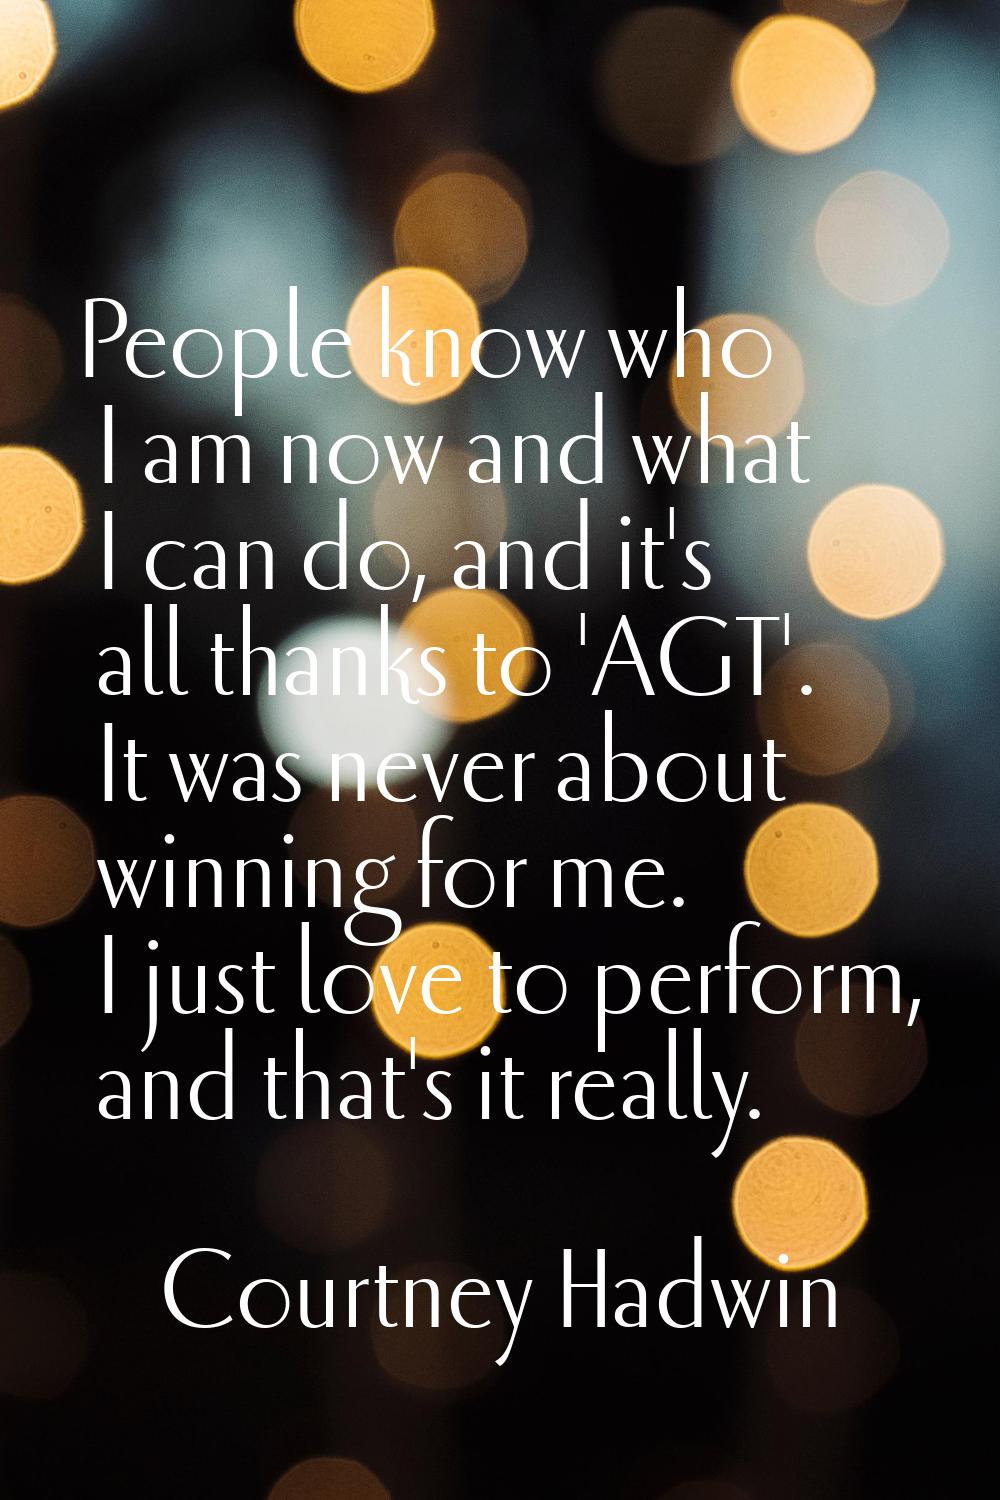 People know who I am now and what I can do, and it's all thanks to 'AGT'. It was never about winnin